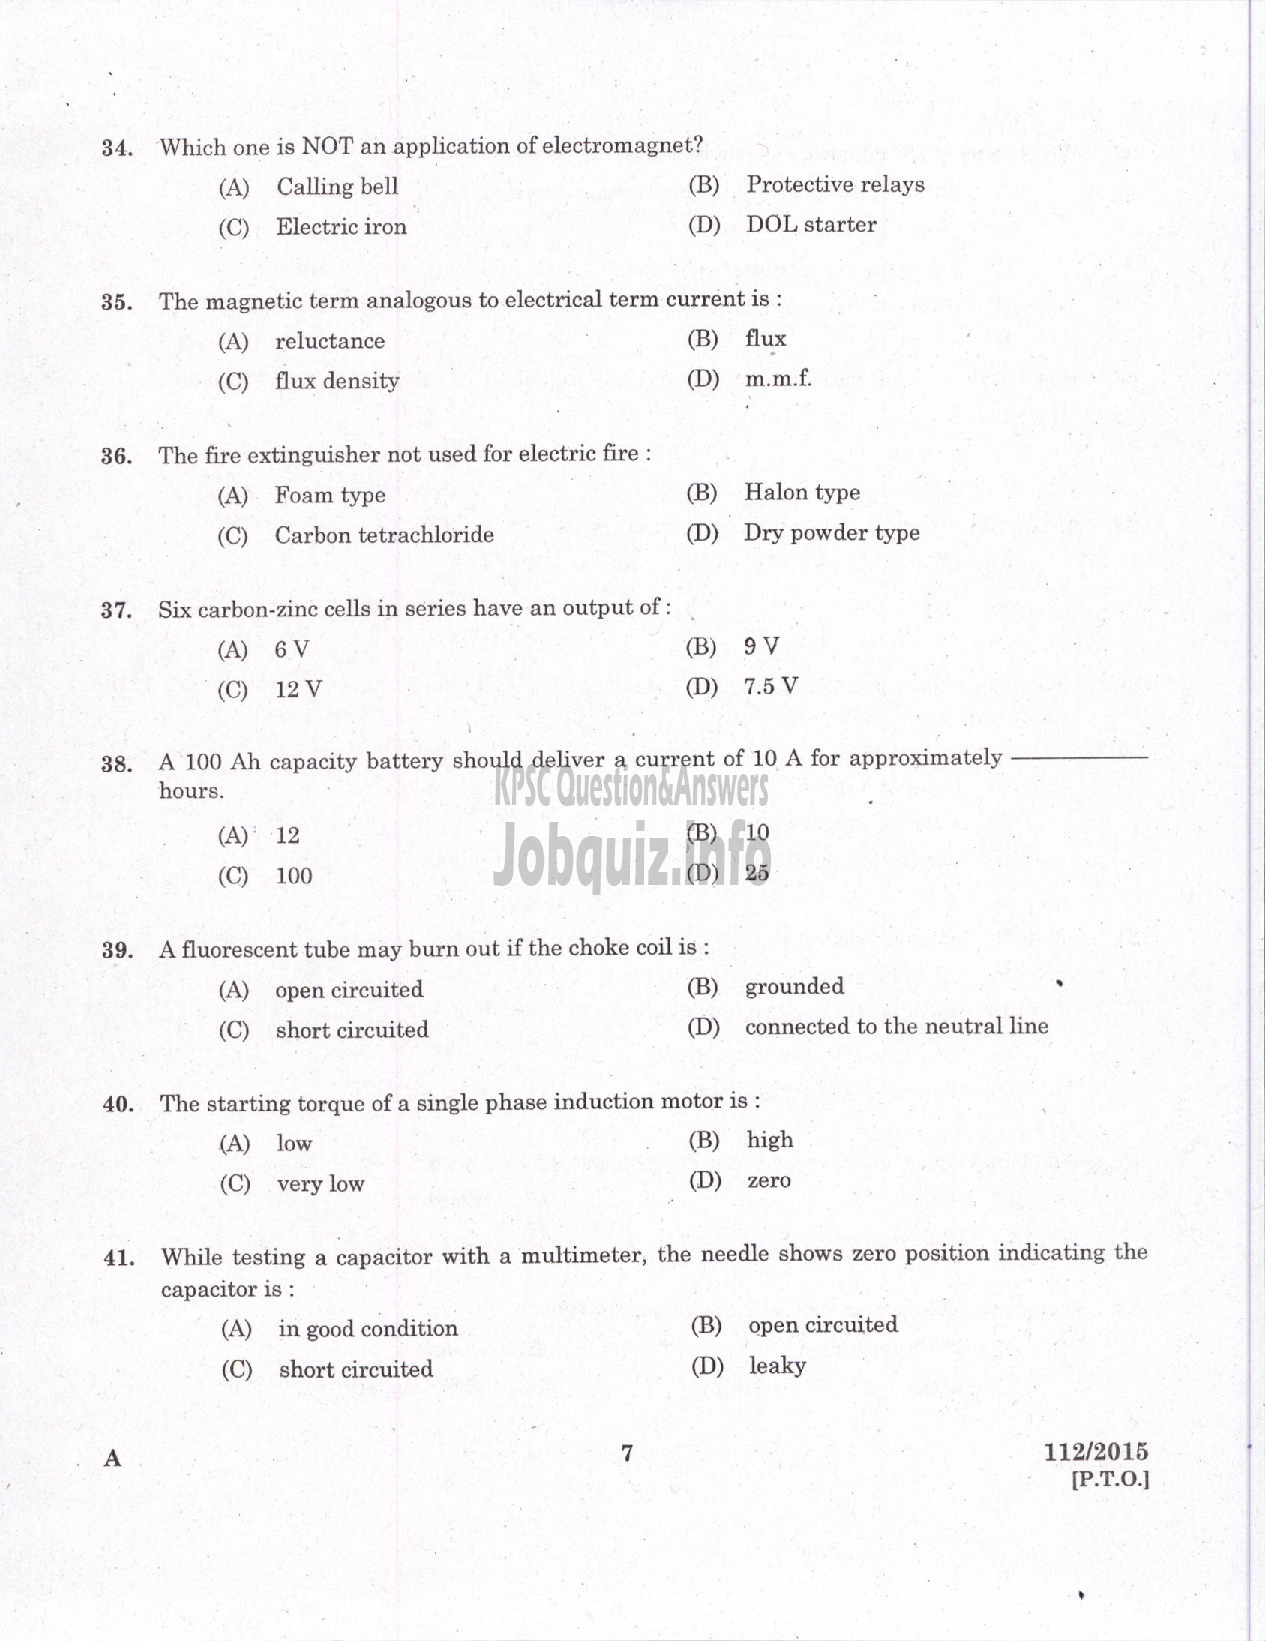 Kerala PSC Question Paper - TRADESMAN ELECTRICAL TECHNICAL EDUCATION/ELECTRICIAN GROUND WATER /ELECTRICIAN GR II PRINTING GOVT PRESSES ELECTRICIAN AGRICULTURE /ELECTRICIAN GR II THE KERALA CERAMICS LTD-5